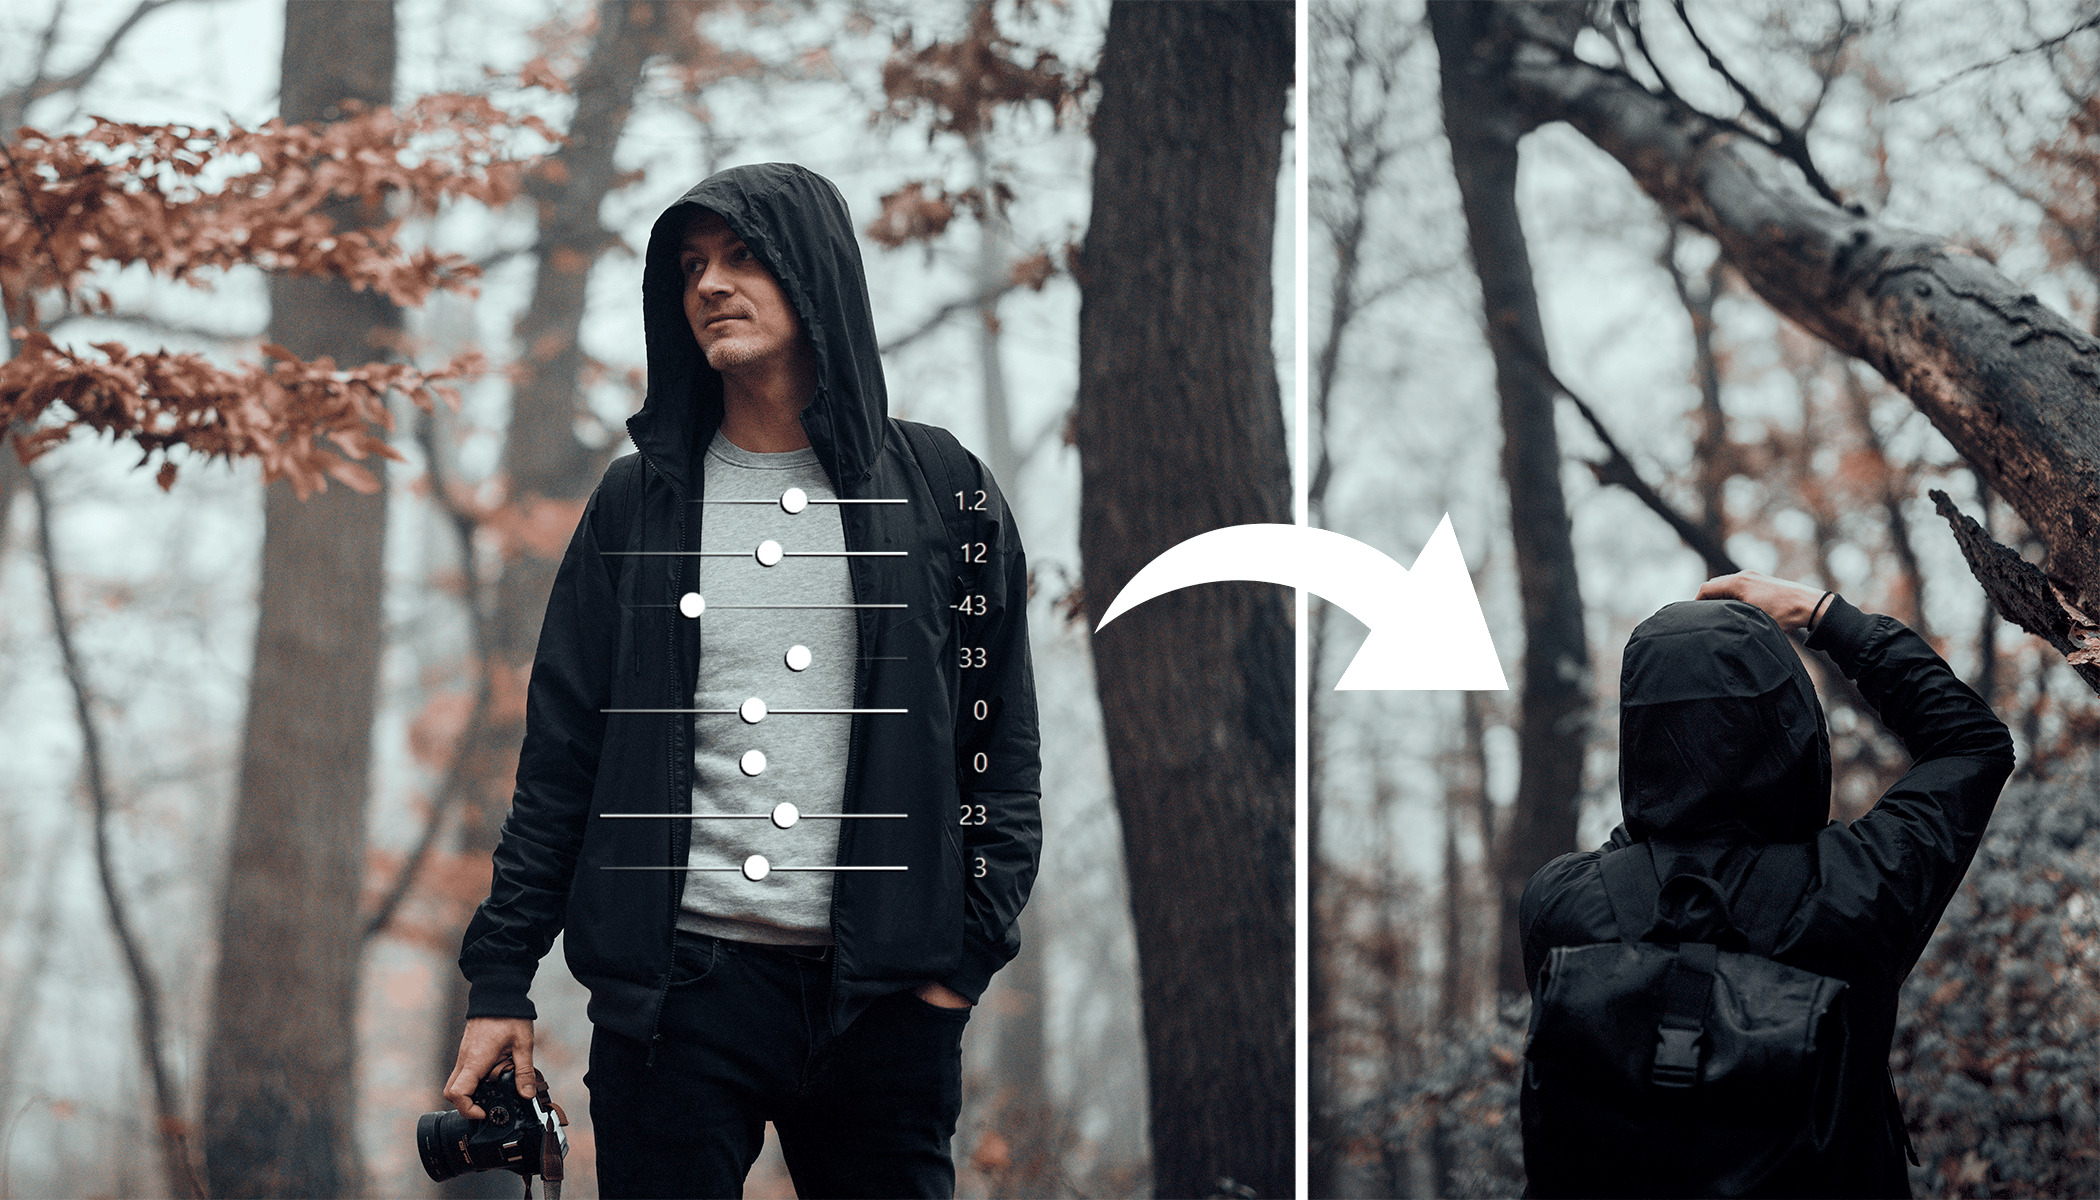 Save time editing your photos by copying edits